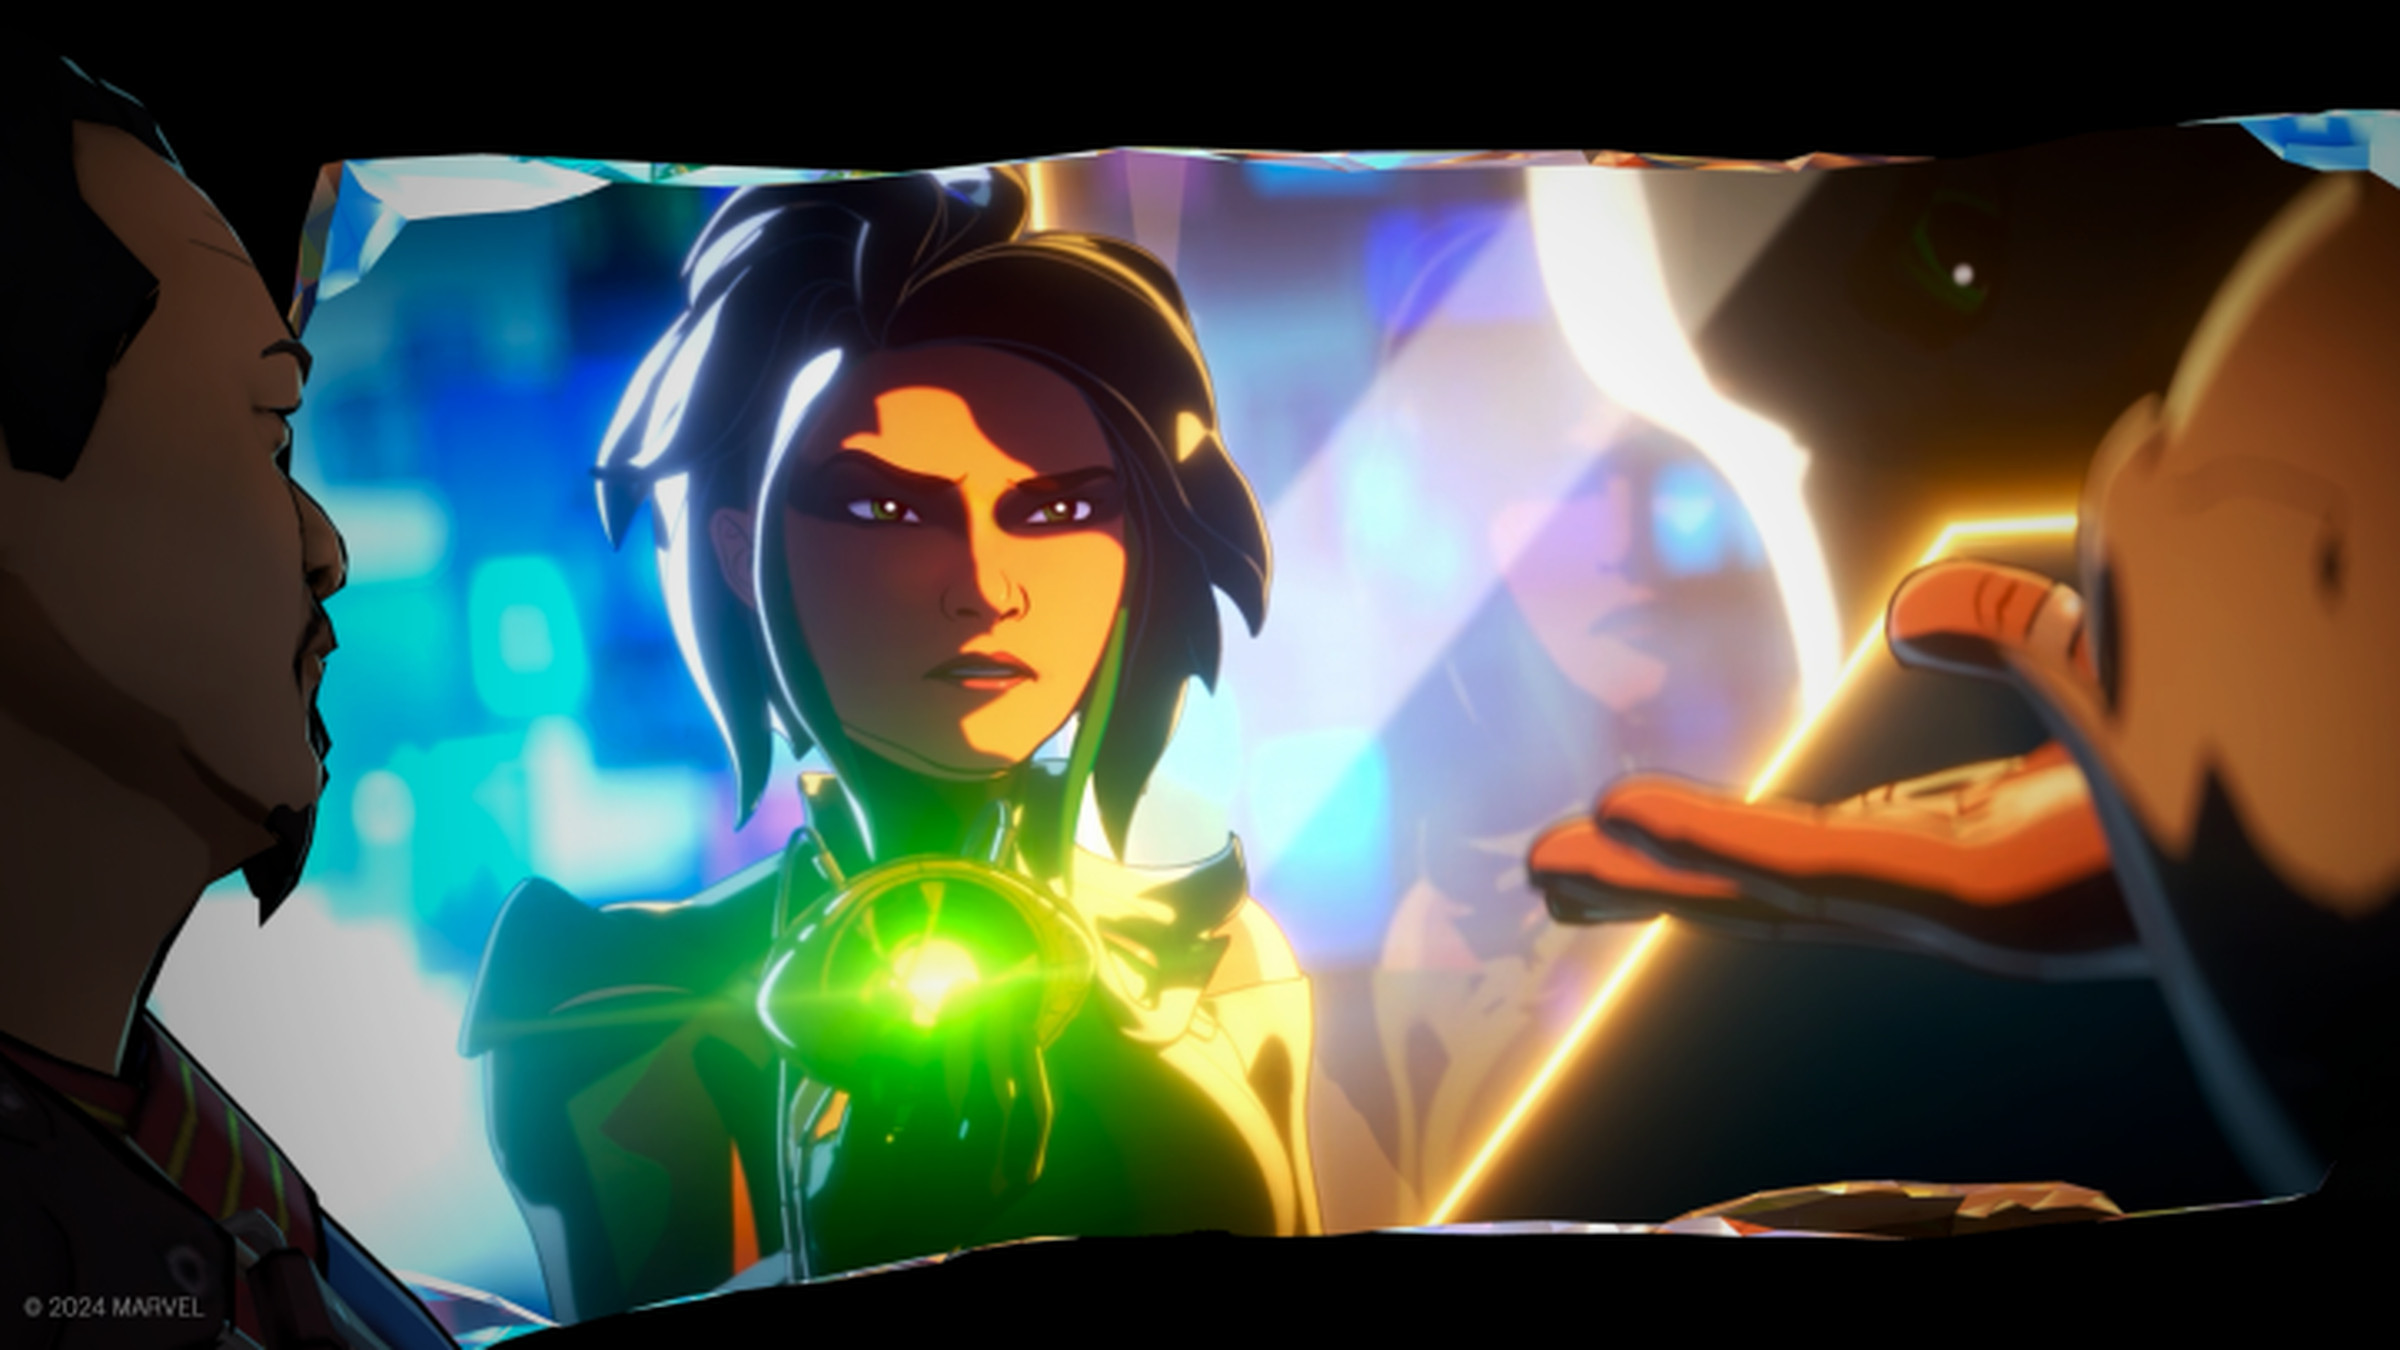 An image from the new series, showing a person holding a green Infinity Stone, while an outstretched hand reaches for it from the foreground.